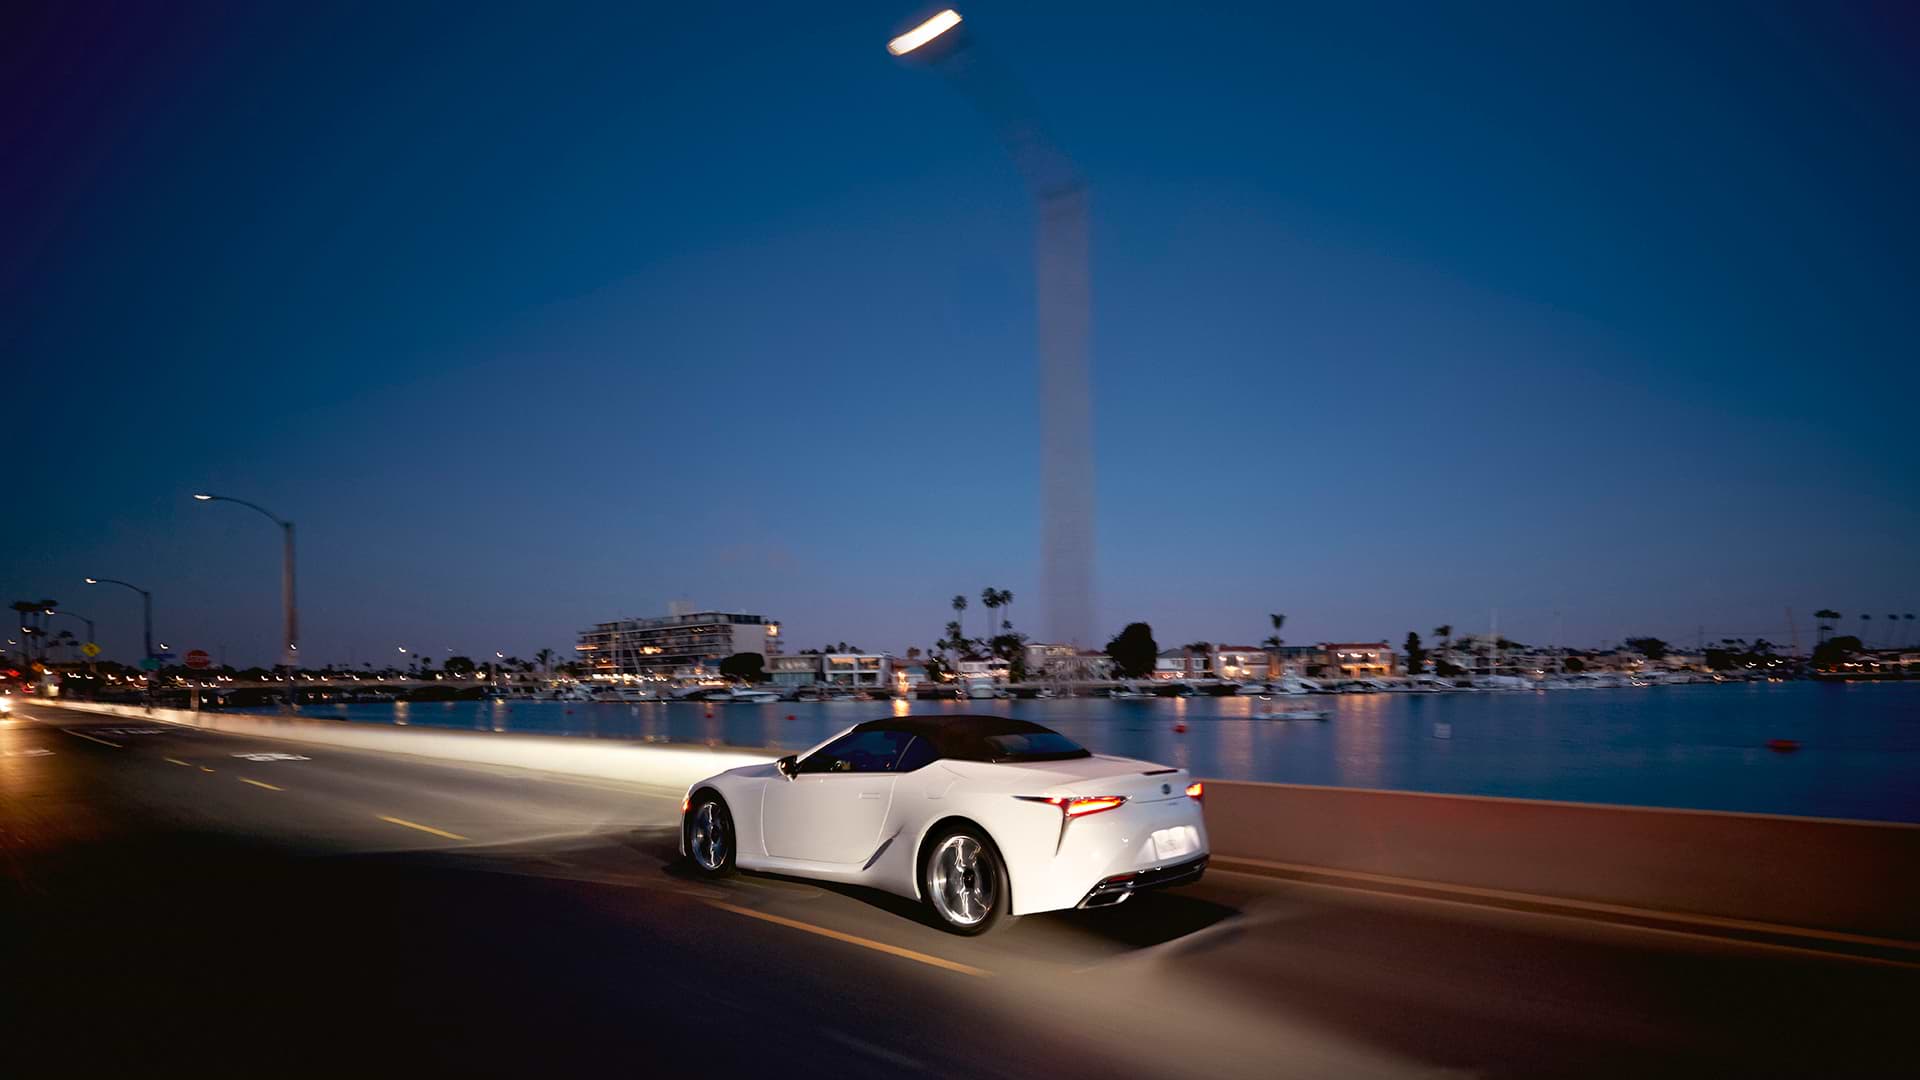 LC 500 Convertible in White Nova shown driving at dusk